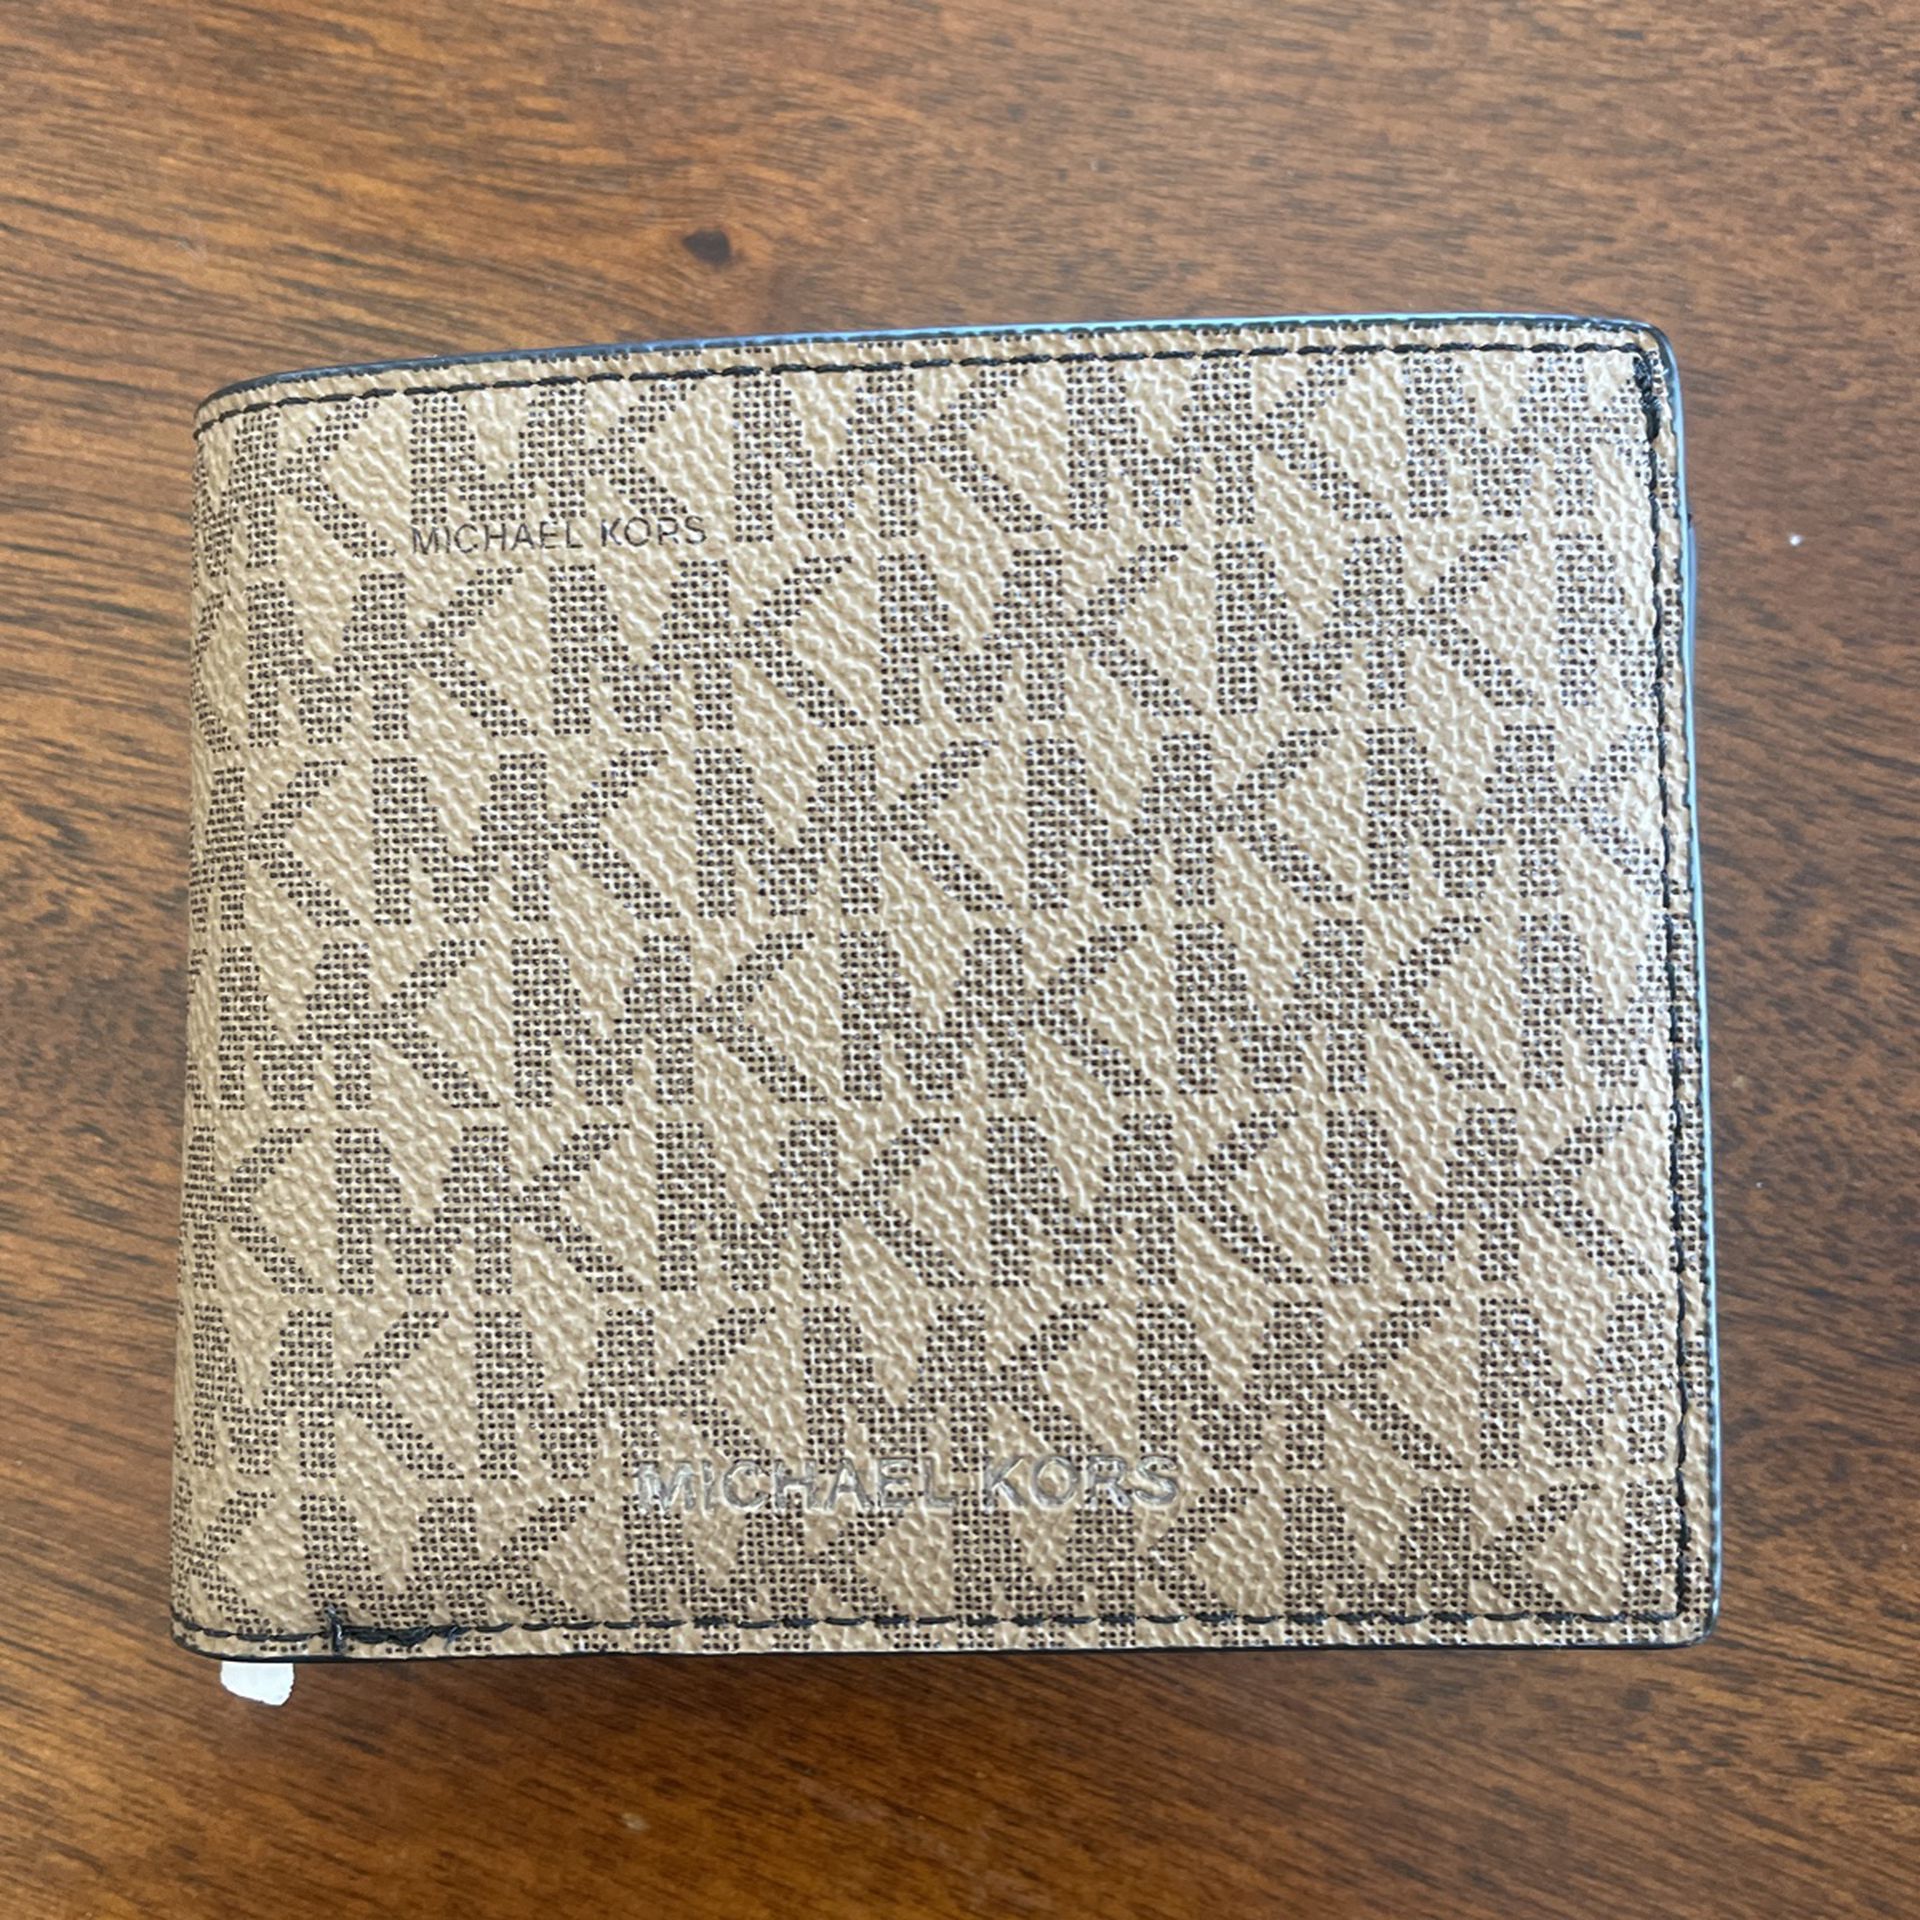 Michael Kors Men’s Leather Wallet with Passcase